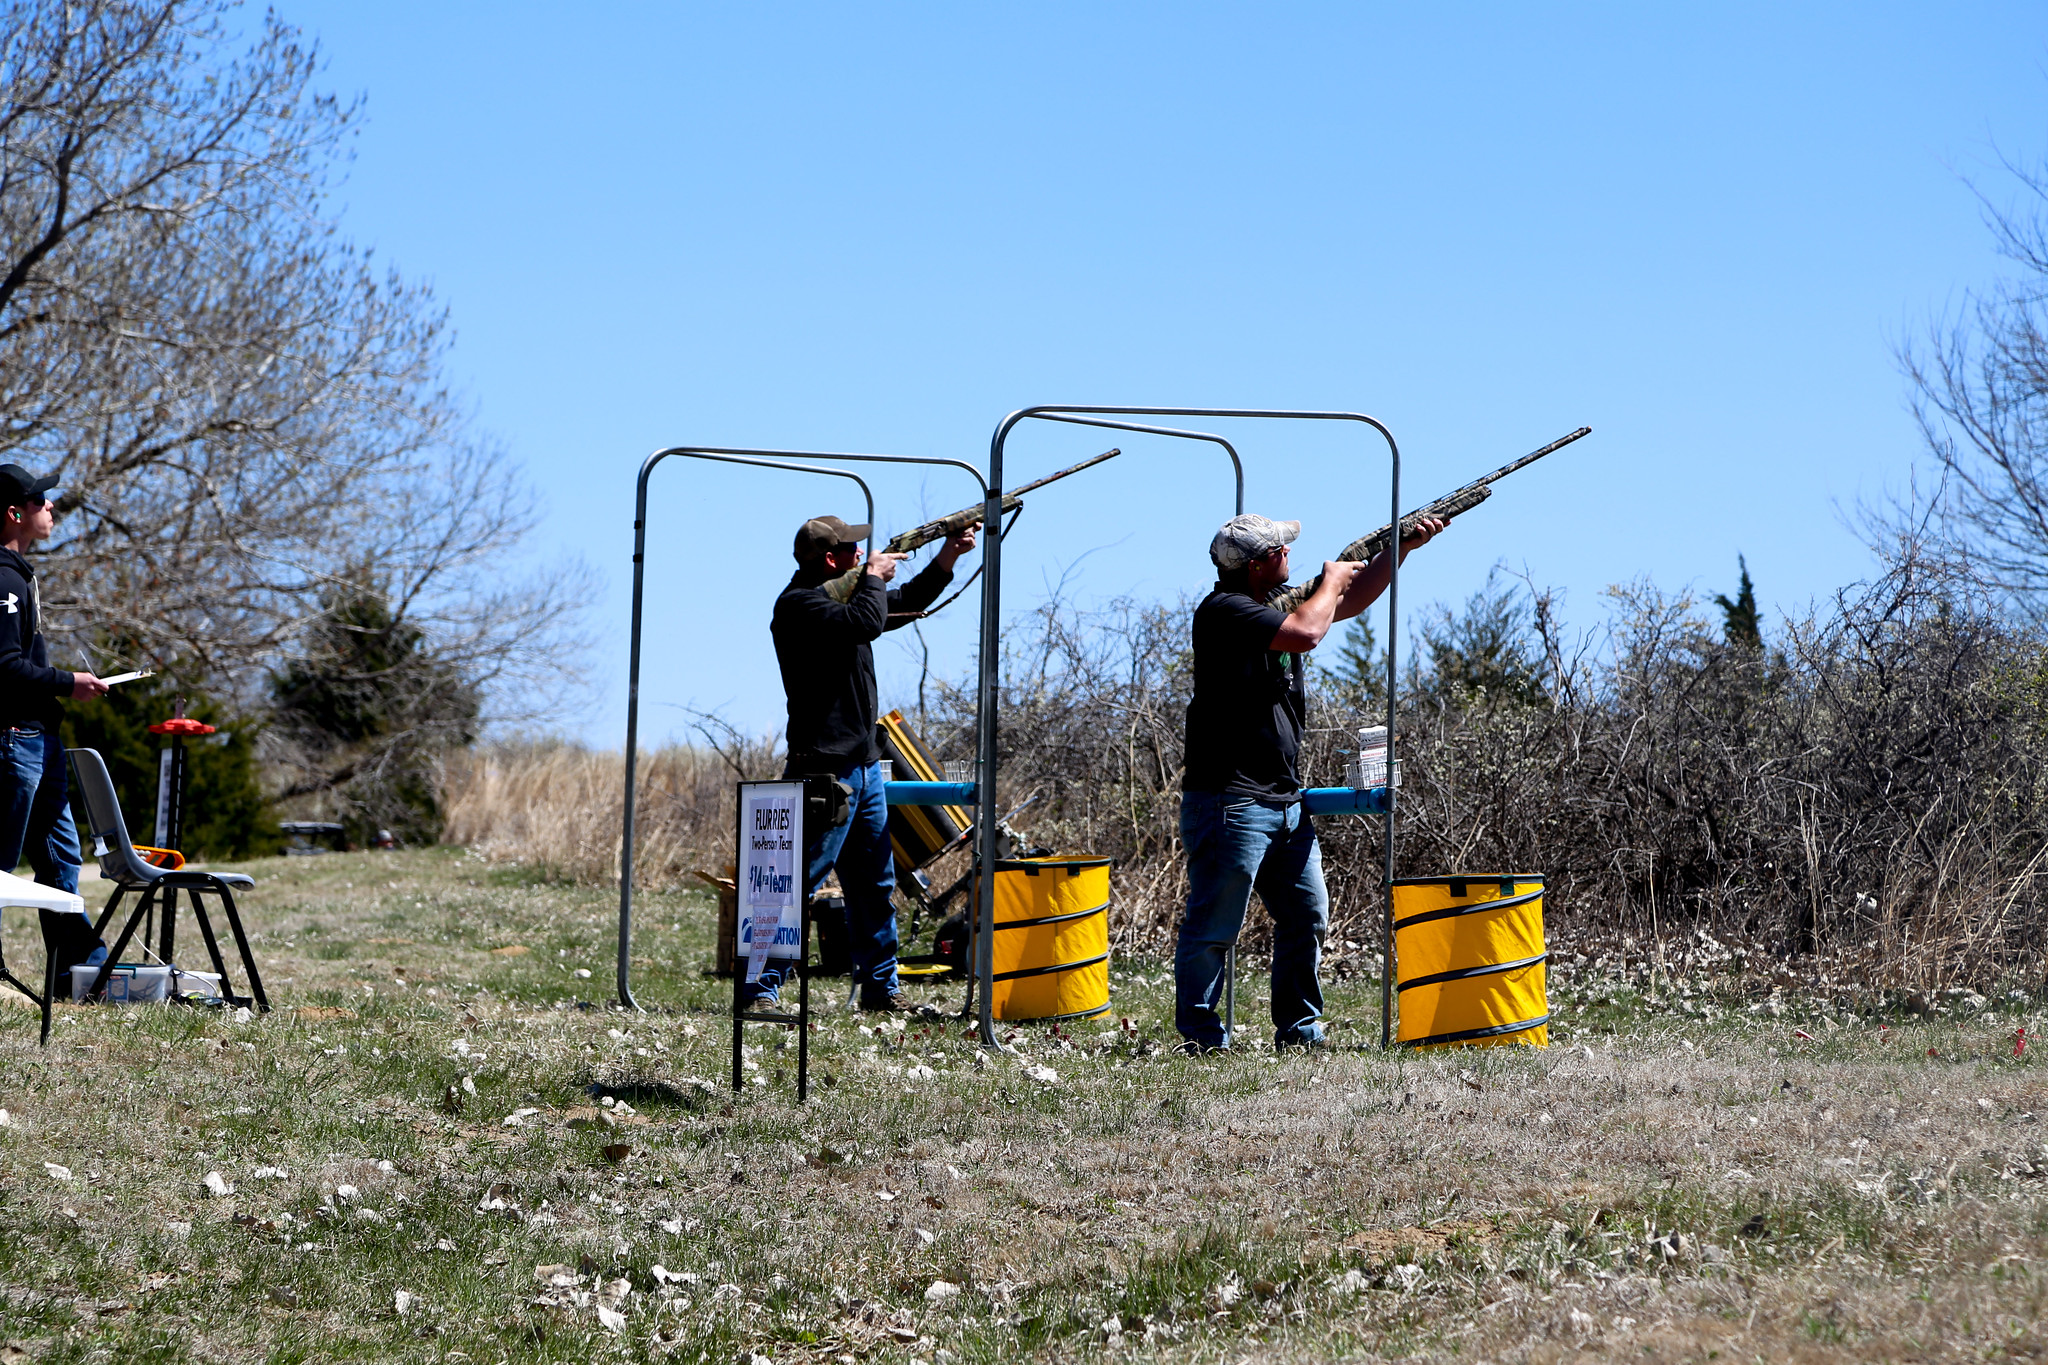 Clayshootmedia – Participants in the 2019 clay shoot take aim at flying sporting clays down range. The 12-station event also features a side game of flurries, which offers participants an opportunity to practice or compete amongst themselves for bragging rights.